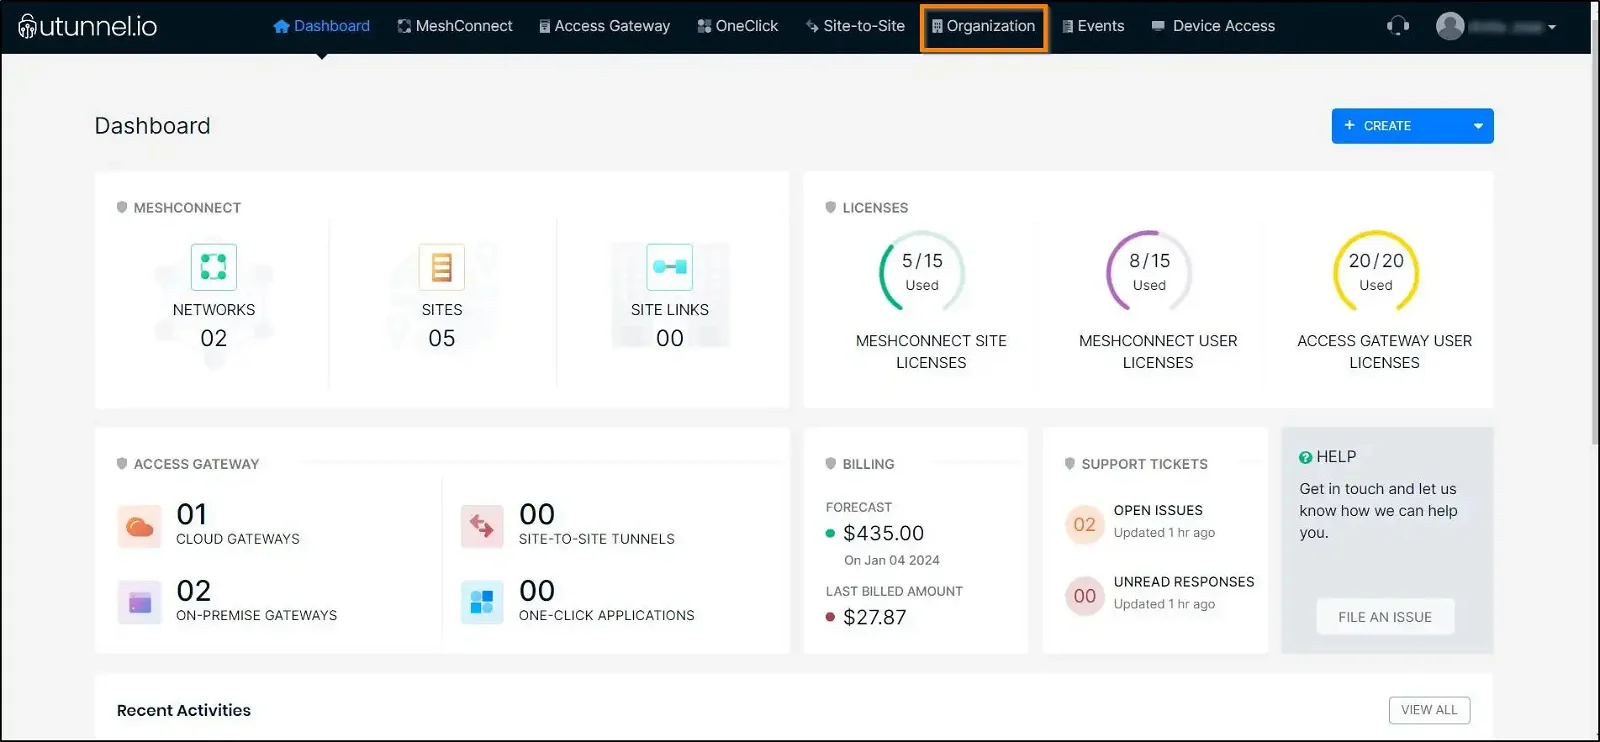 How to enable SSO and use Azure AD as identity provider dashboard